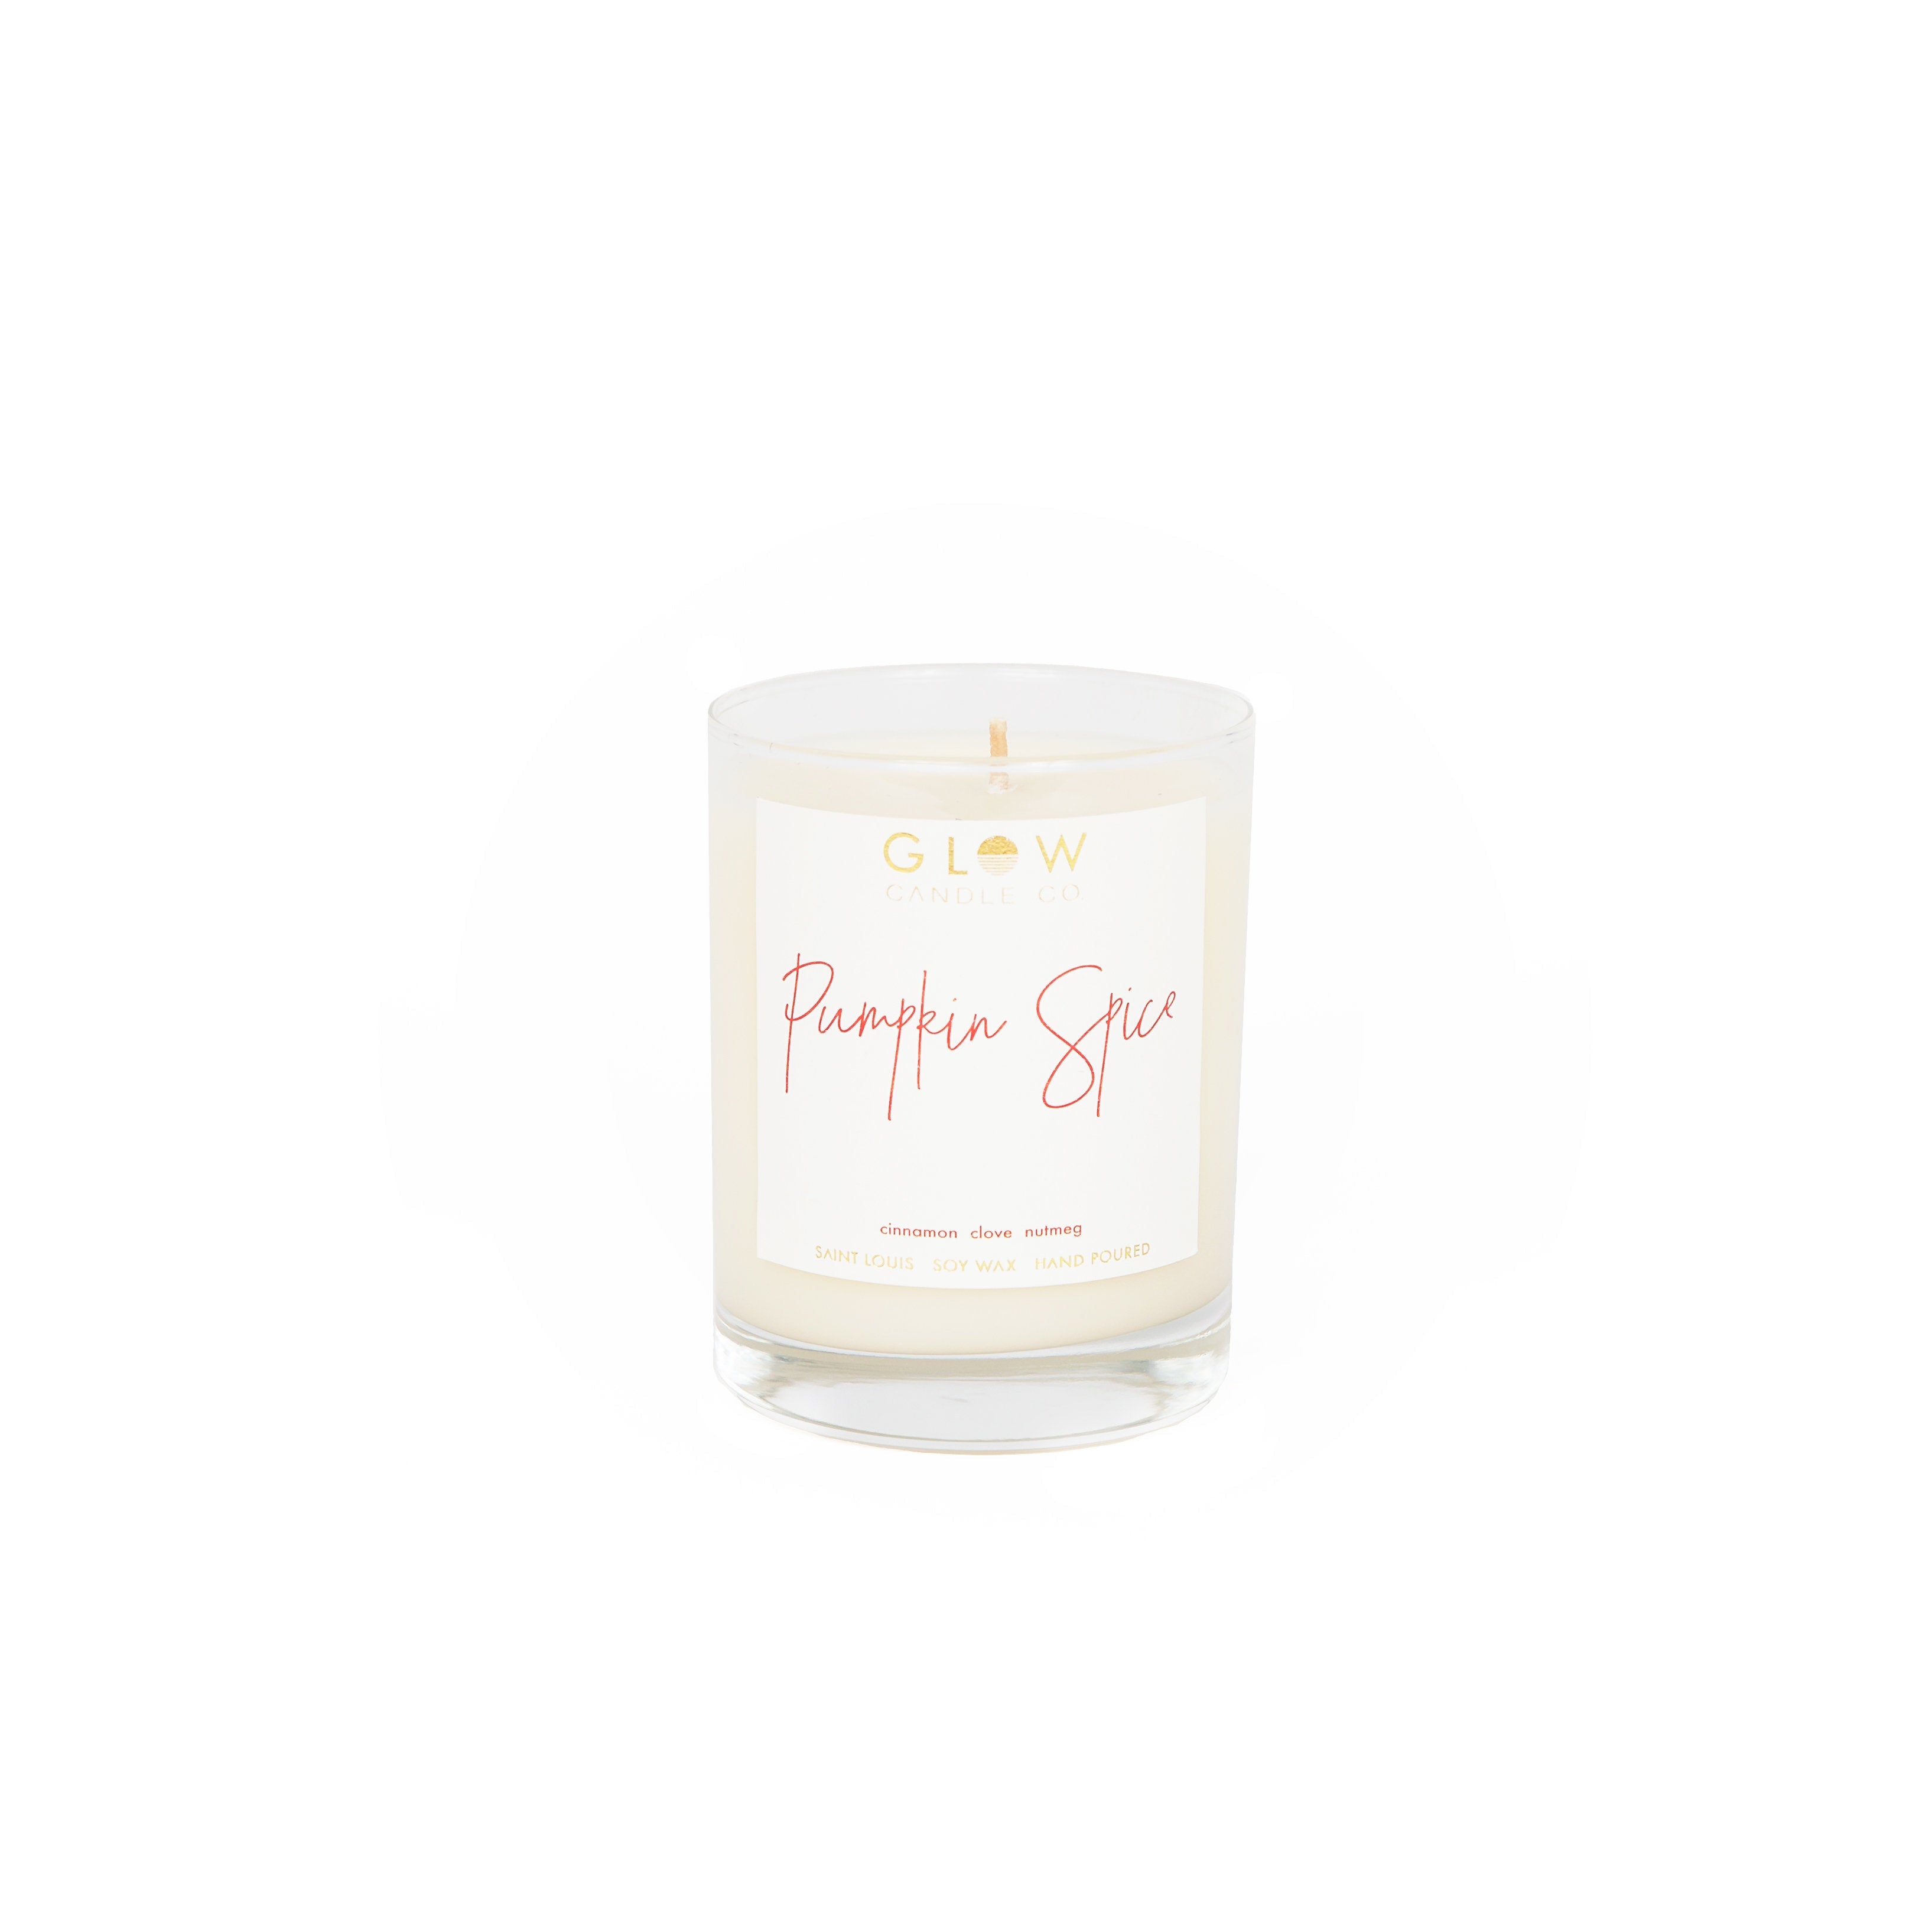  Pumpkin Spice by Glow Candle Company Glow Candle Company Perfumarie